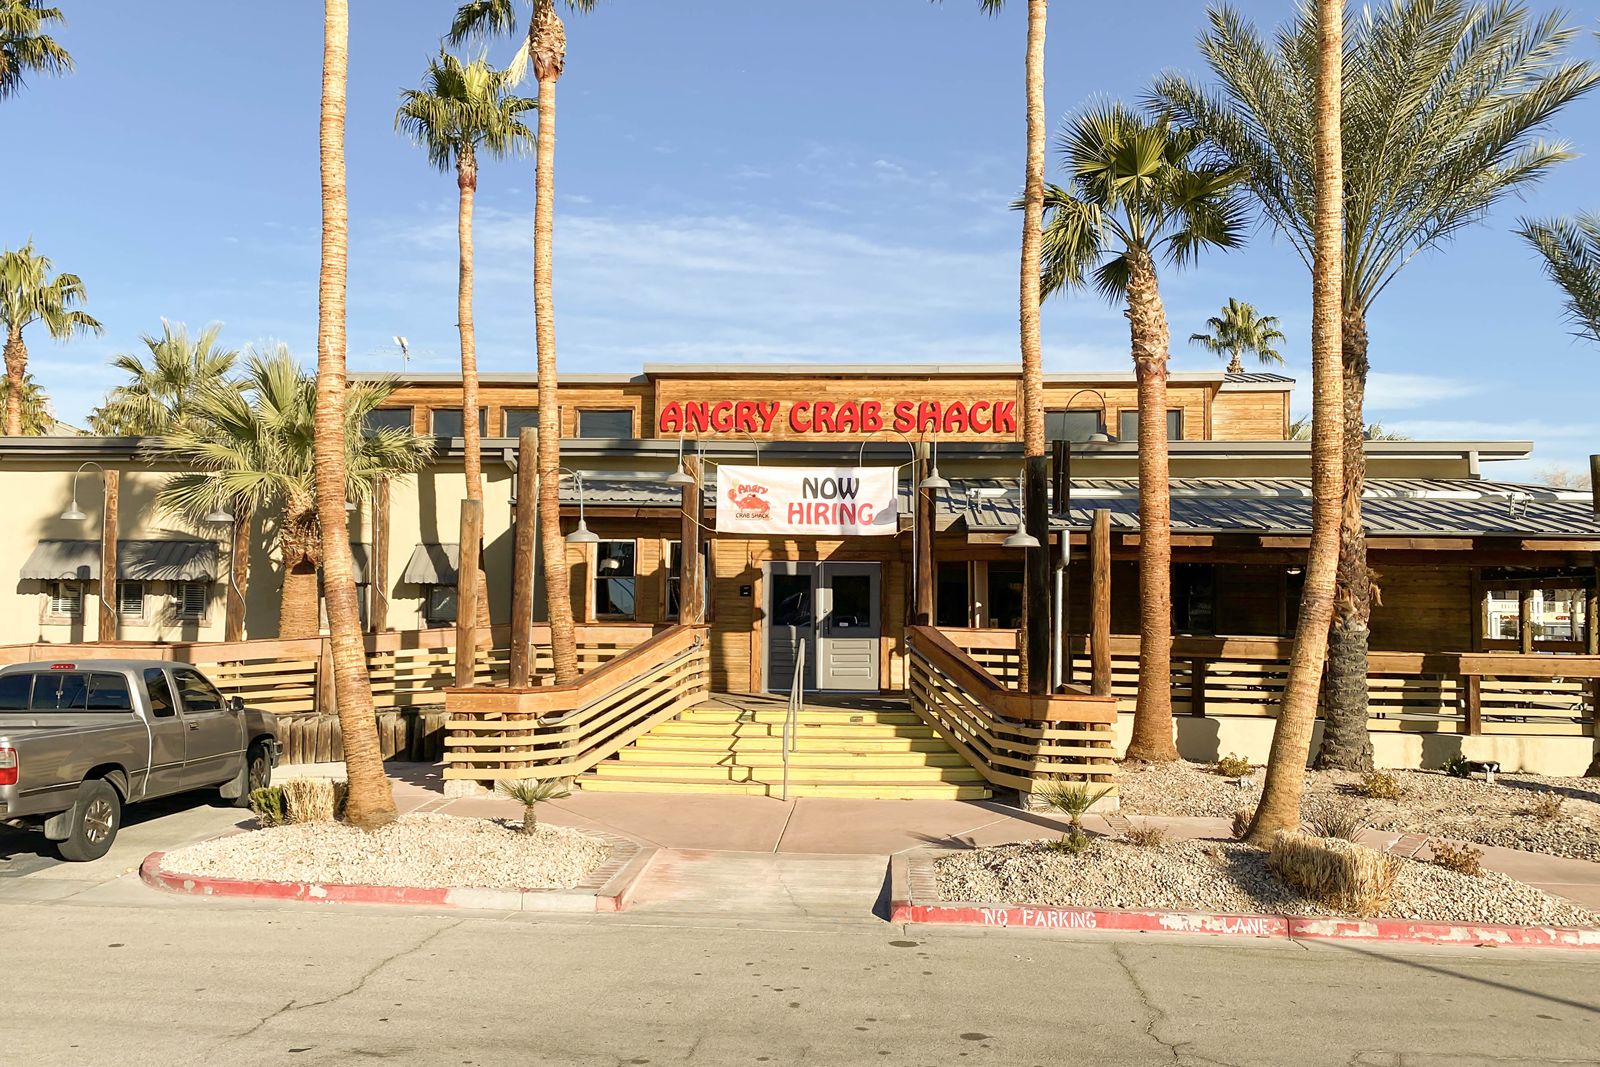 Angry Crab Shack Opens Newest Restaurant Just Outside Las Vegas; New Location Marks Major Growth Milestone for the Arizona-Based Franchise